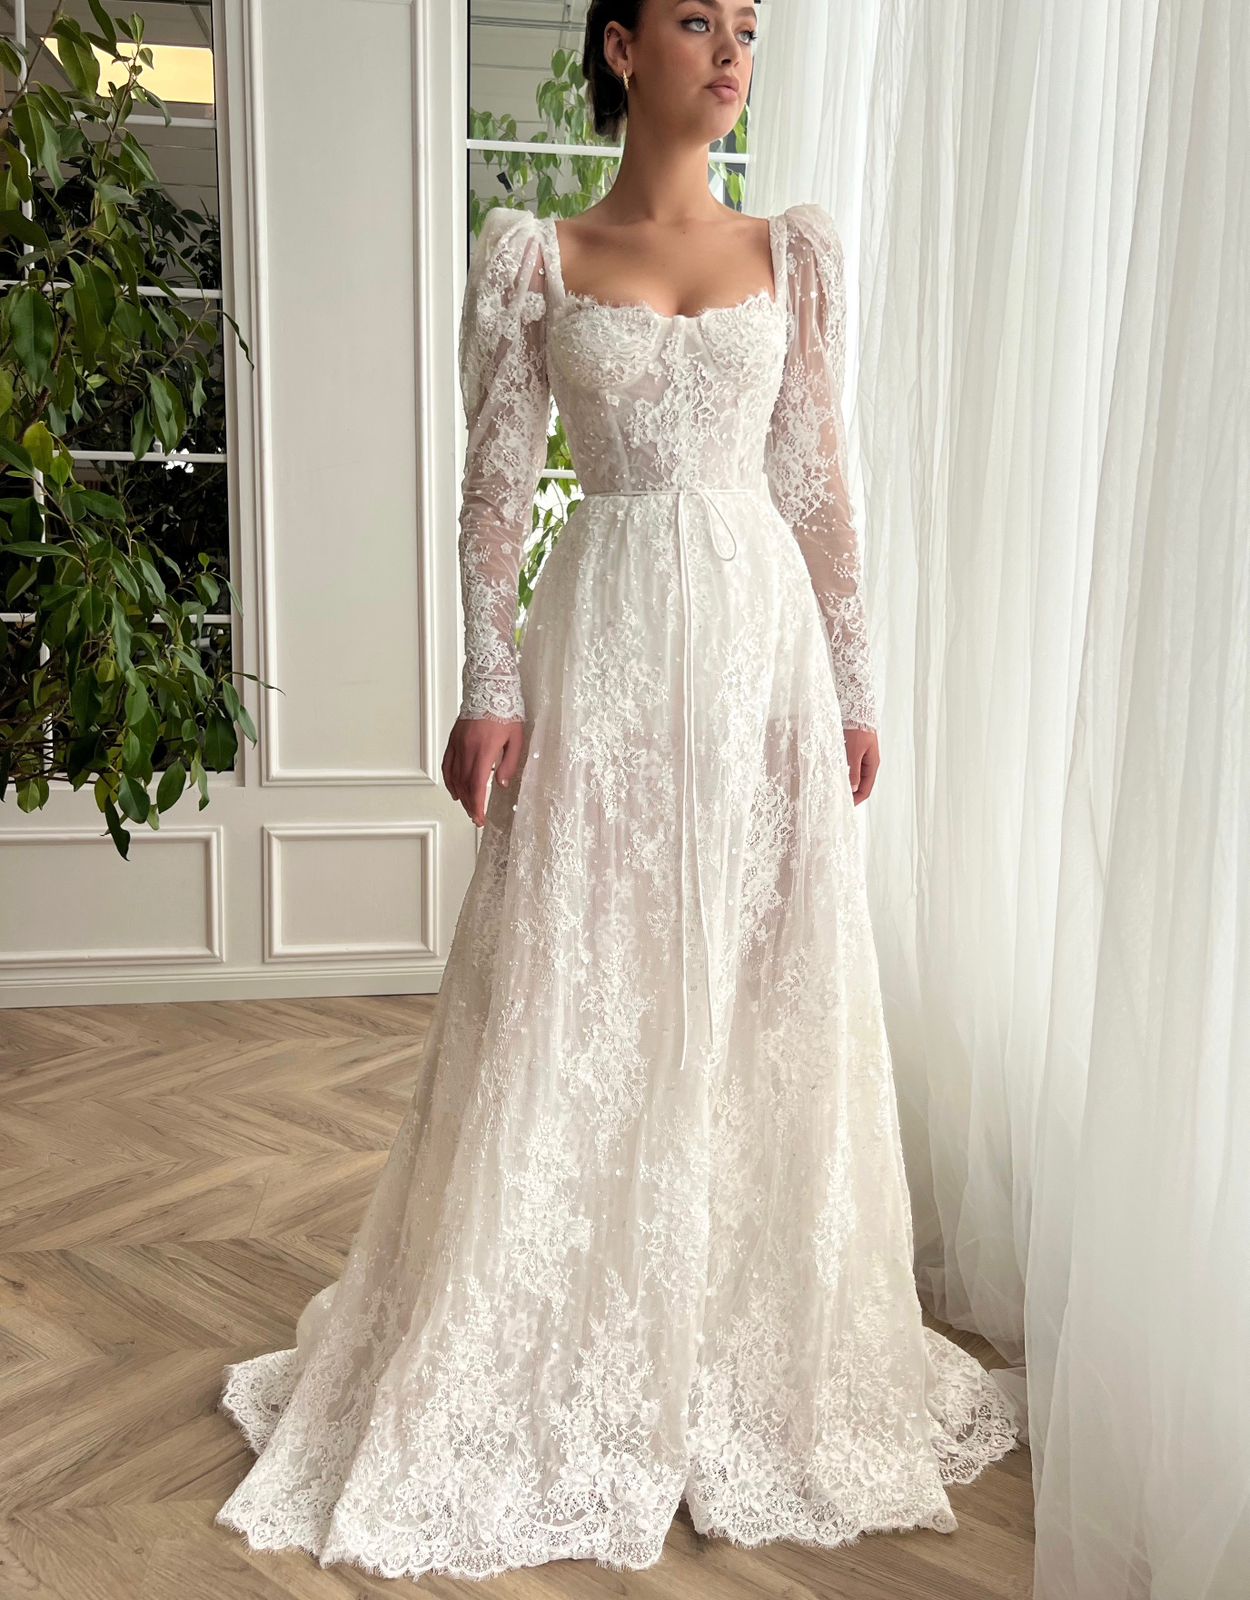 Ethereal Lace Reverie Gown | Teuta Matoshi